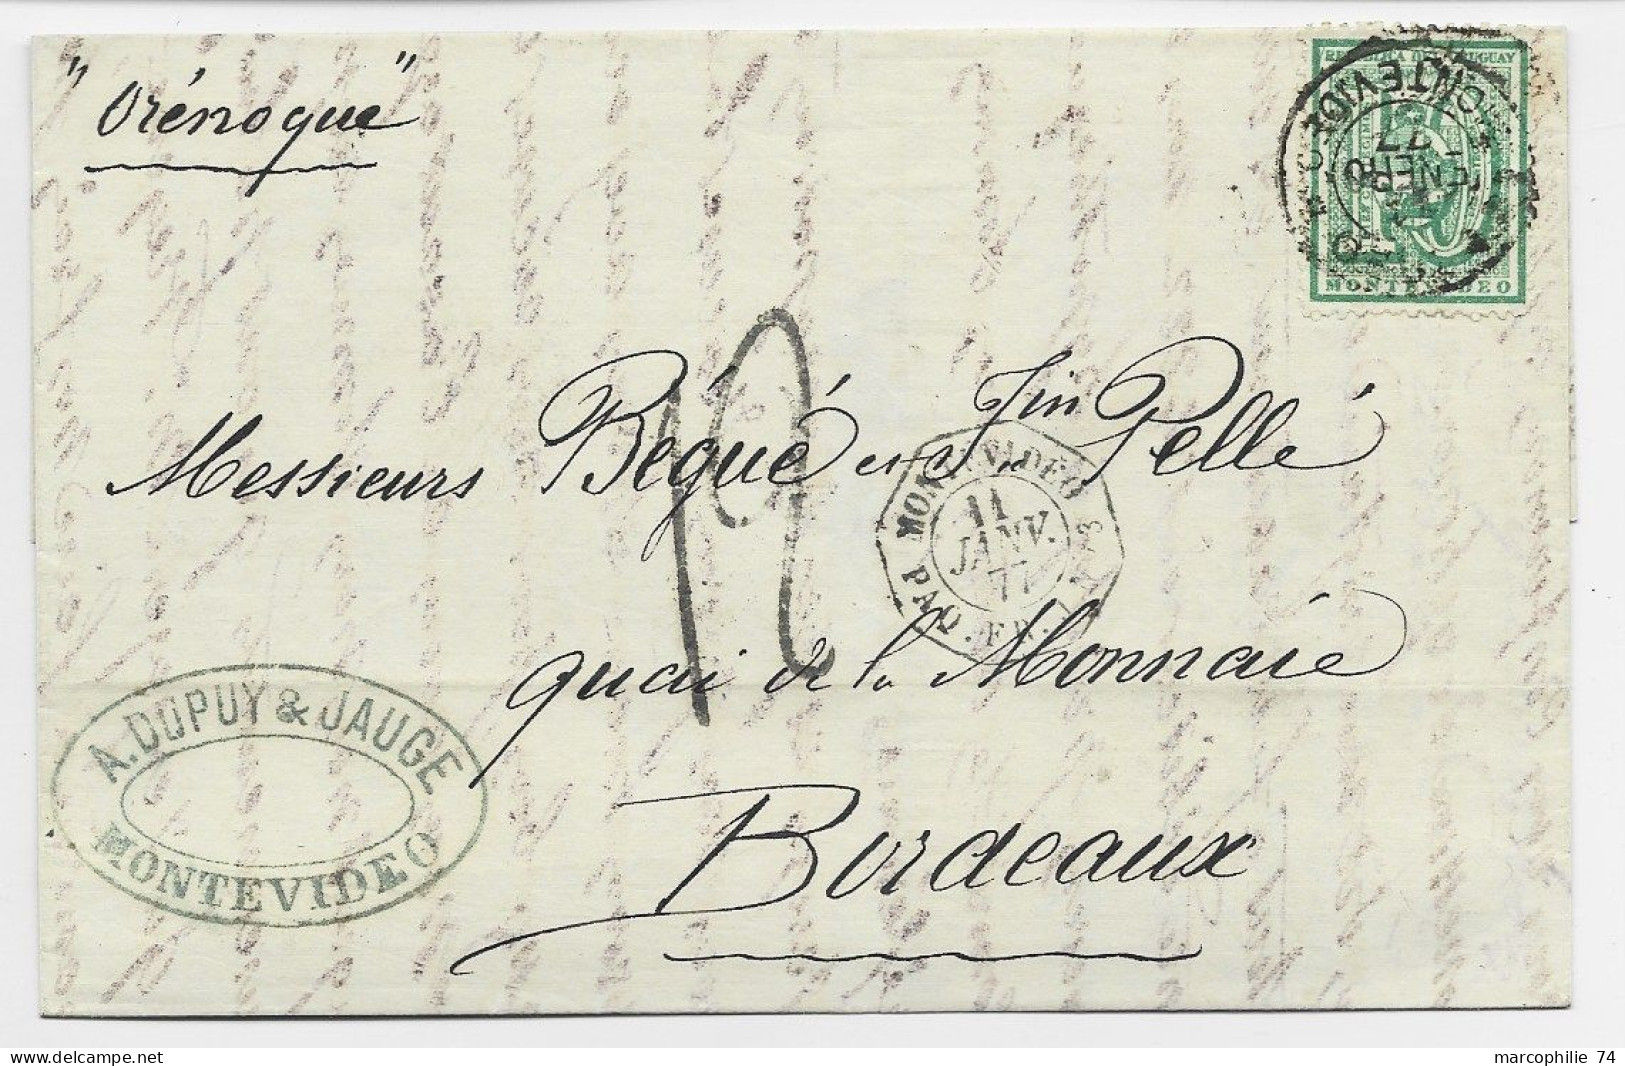 URUGUAY 10C SEUL SOLO LETTRE COVER MONTEVIDEO 1877 + CACHET OGTOG MONTEVIDEO PAQ FR J N°3 TO BORDEAUX TAXE 12 TAMPON - Uruguay